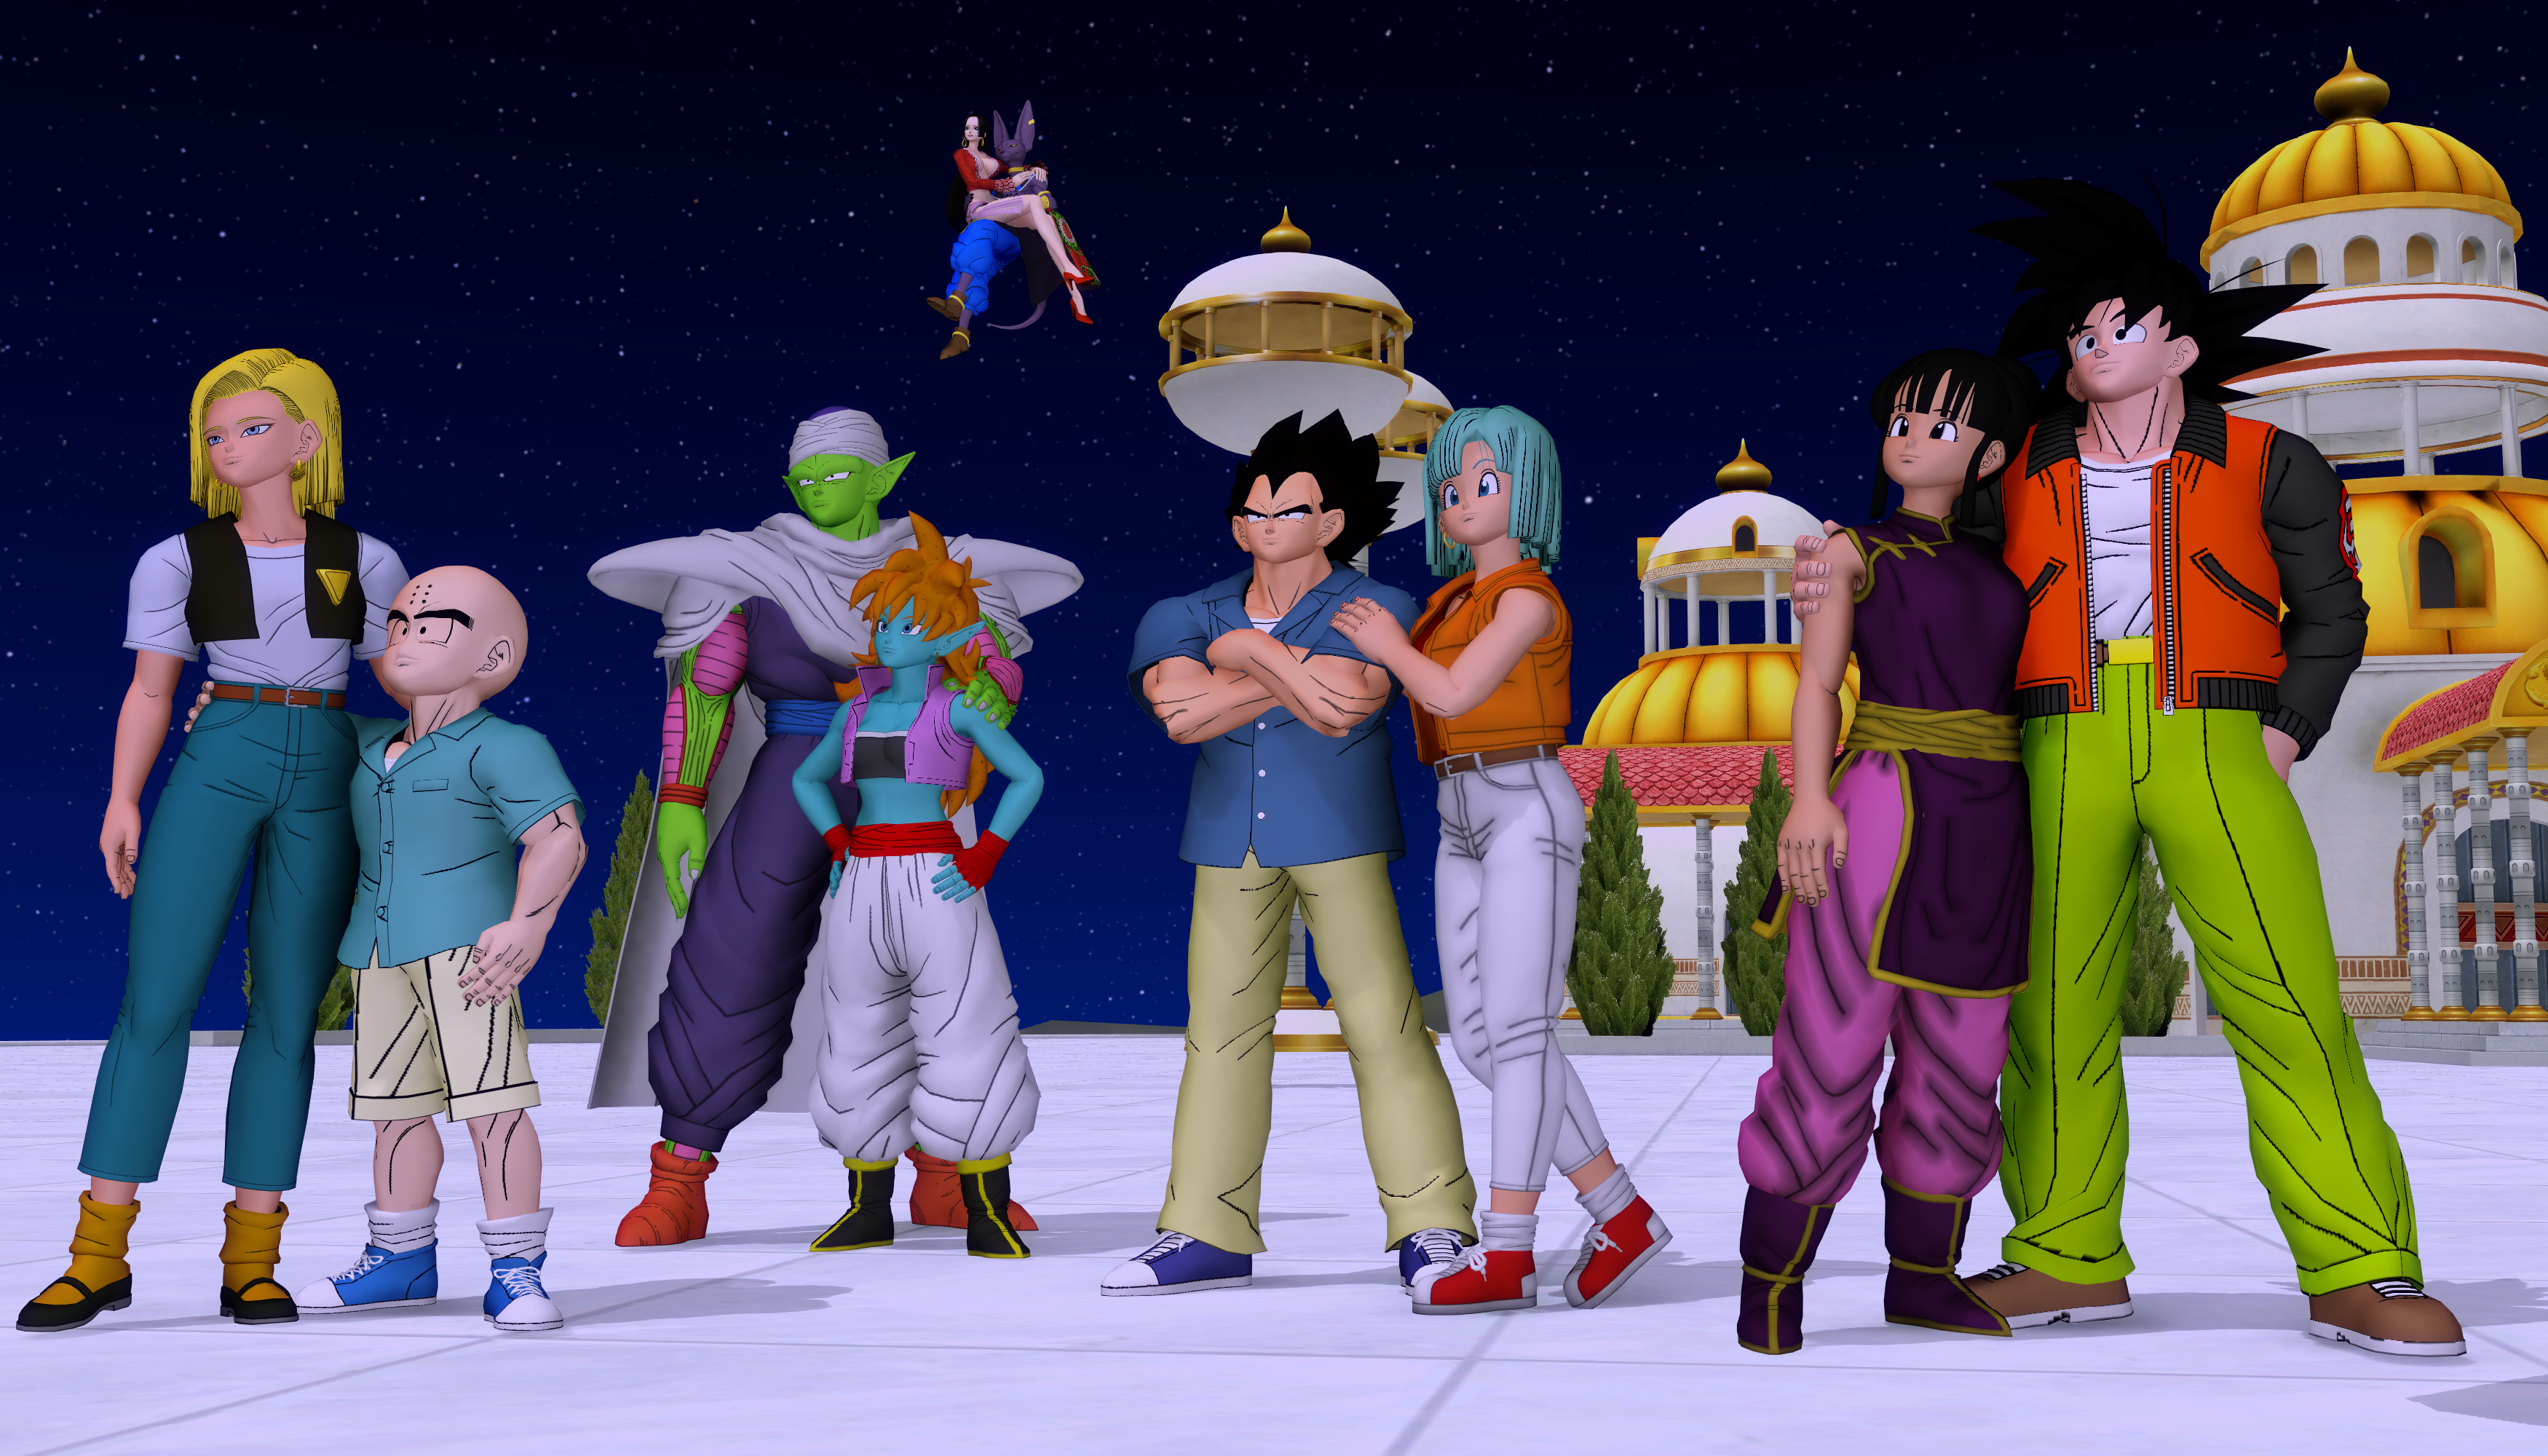 All Androids In Dragon Ball by THANHDB on DeviantArt